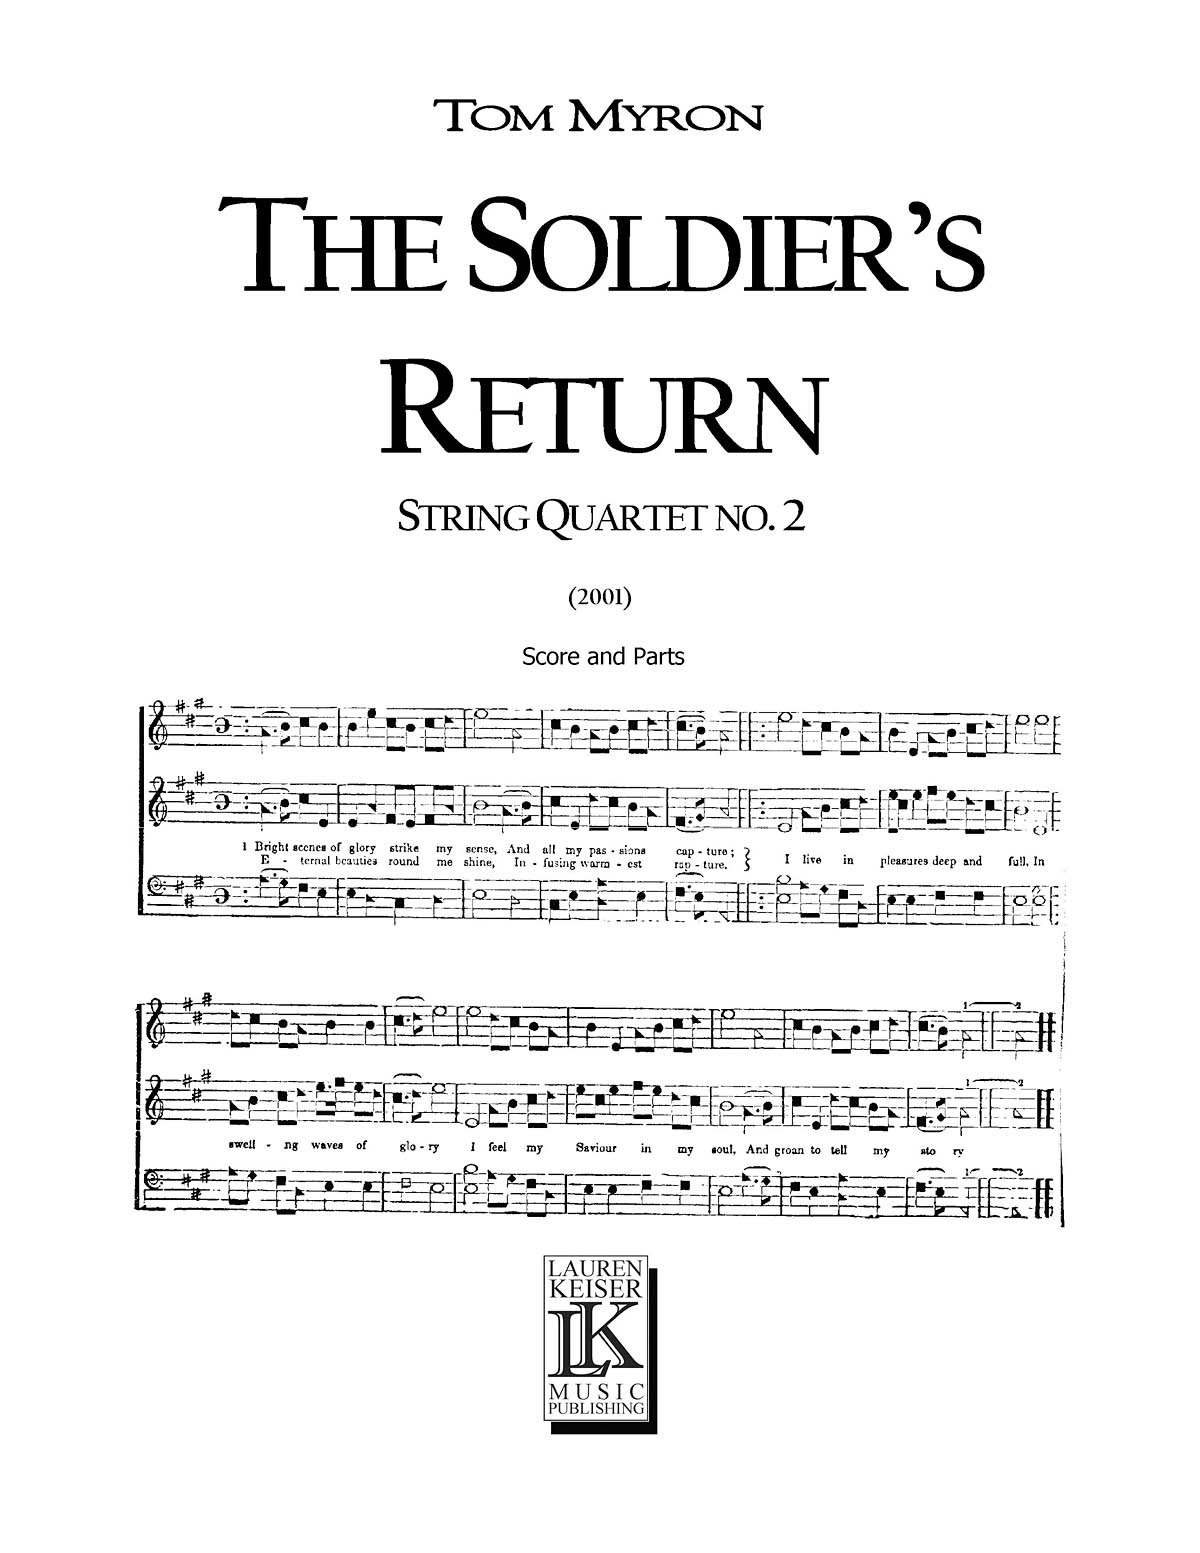 The Soldier's Return